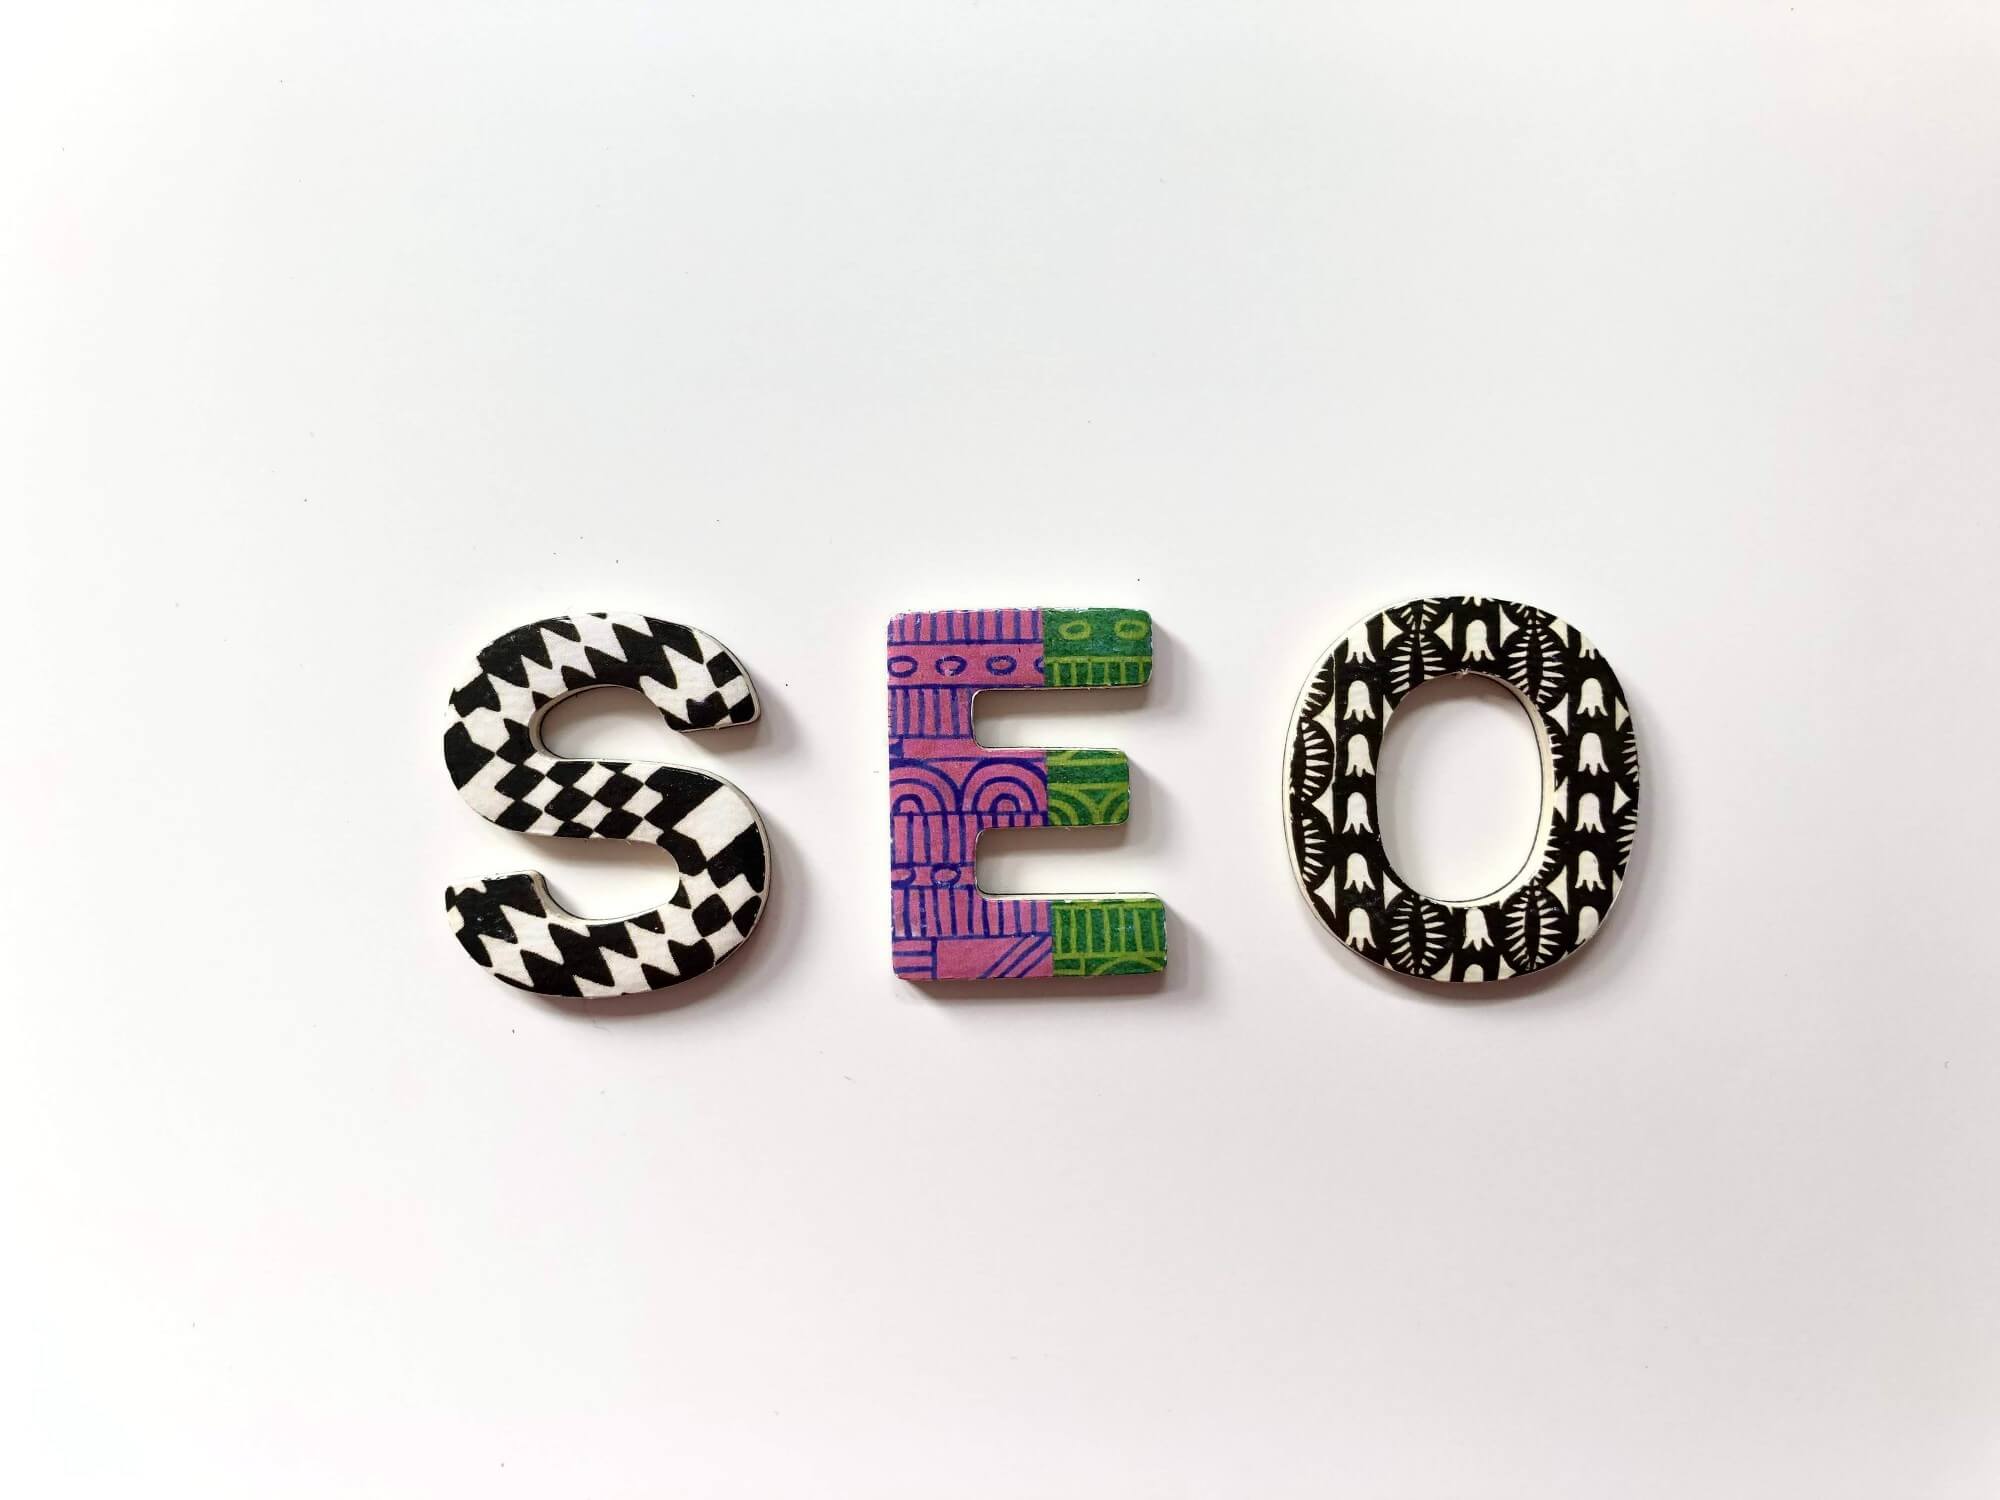 5 SEO Rules that Small Businesses Should Hear